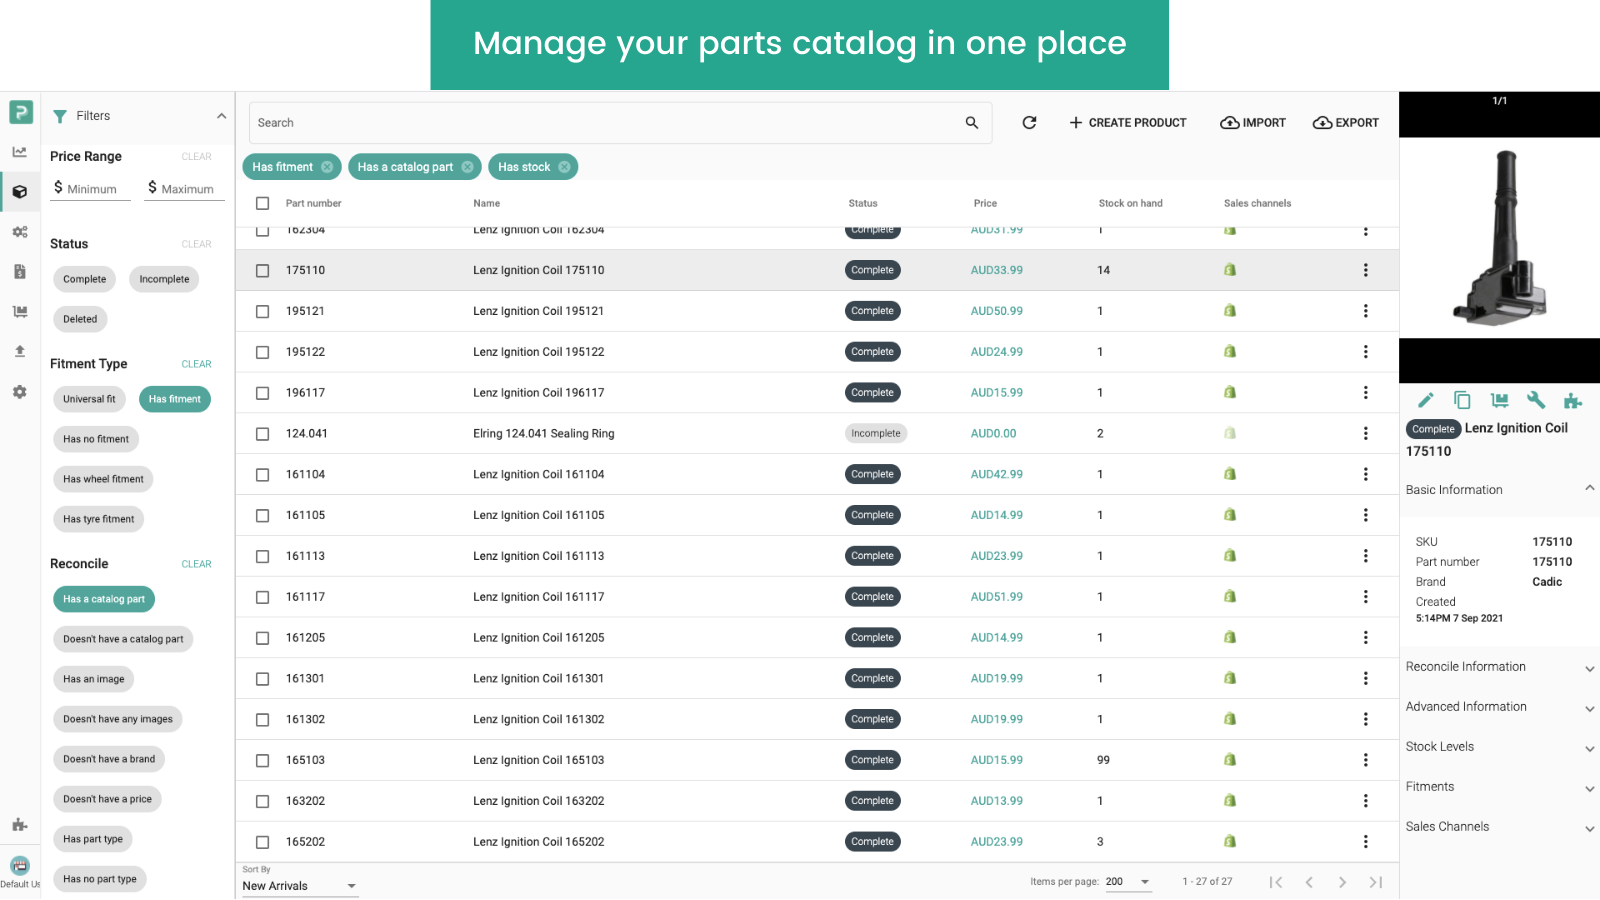 Manage auto parts catalogue in one place with PartsPal